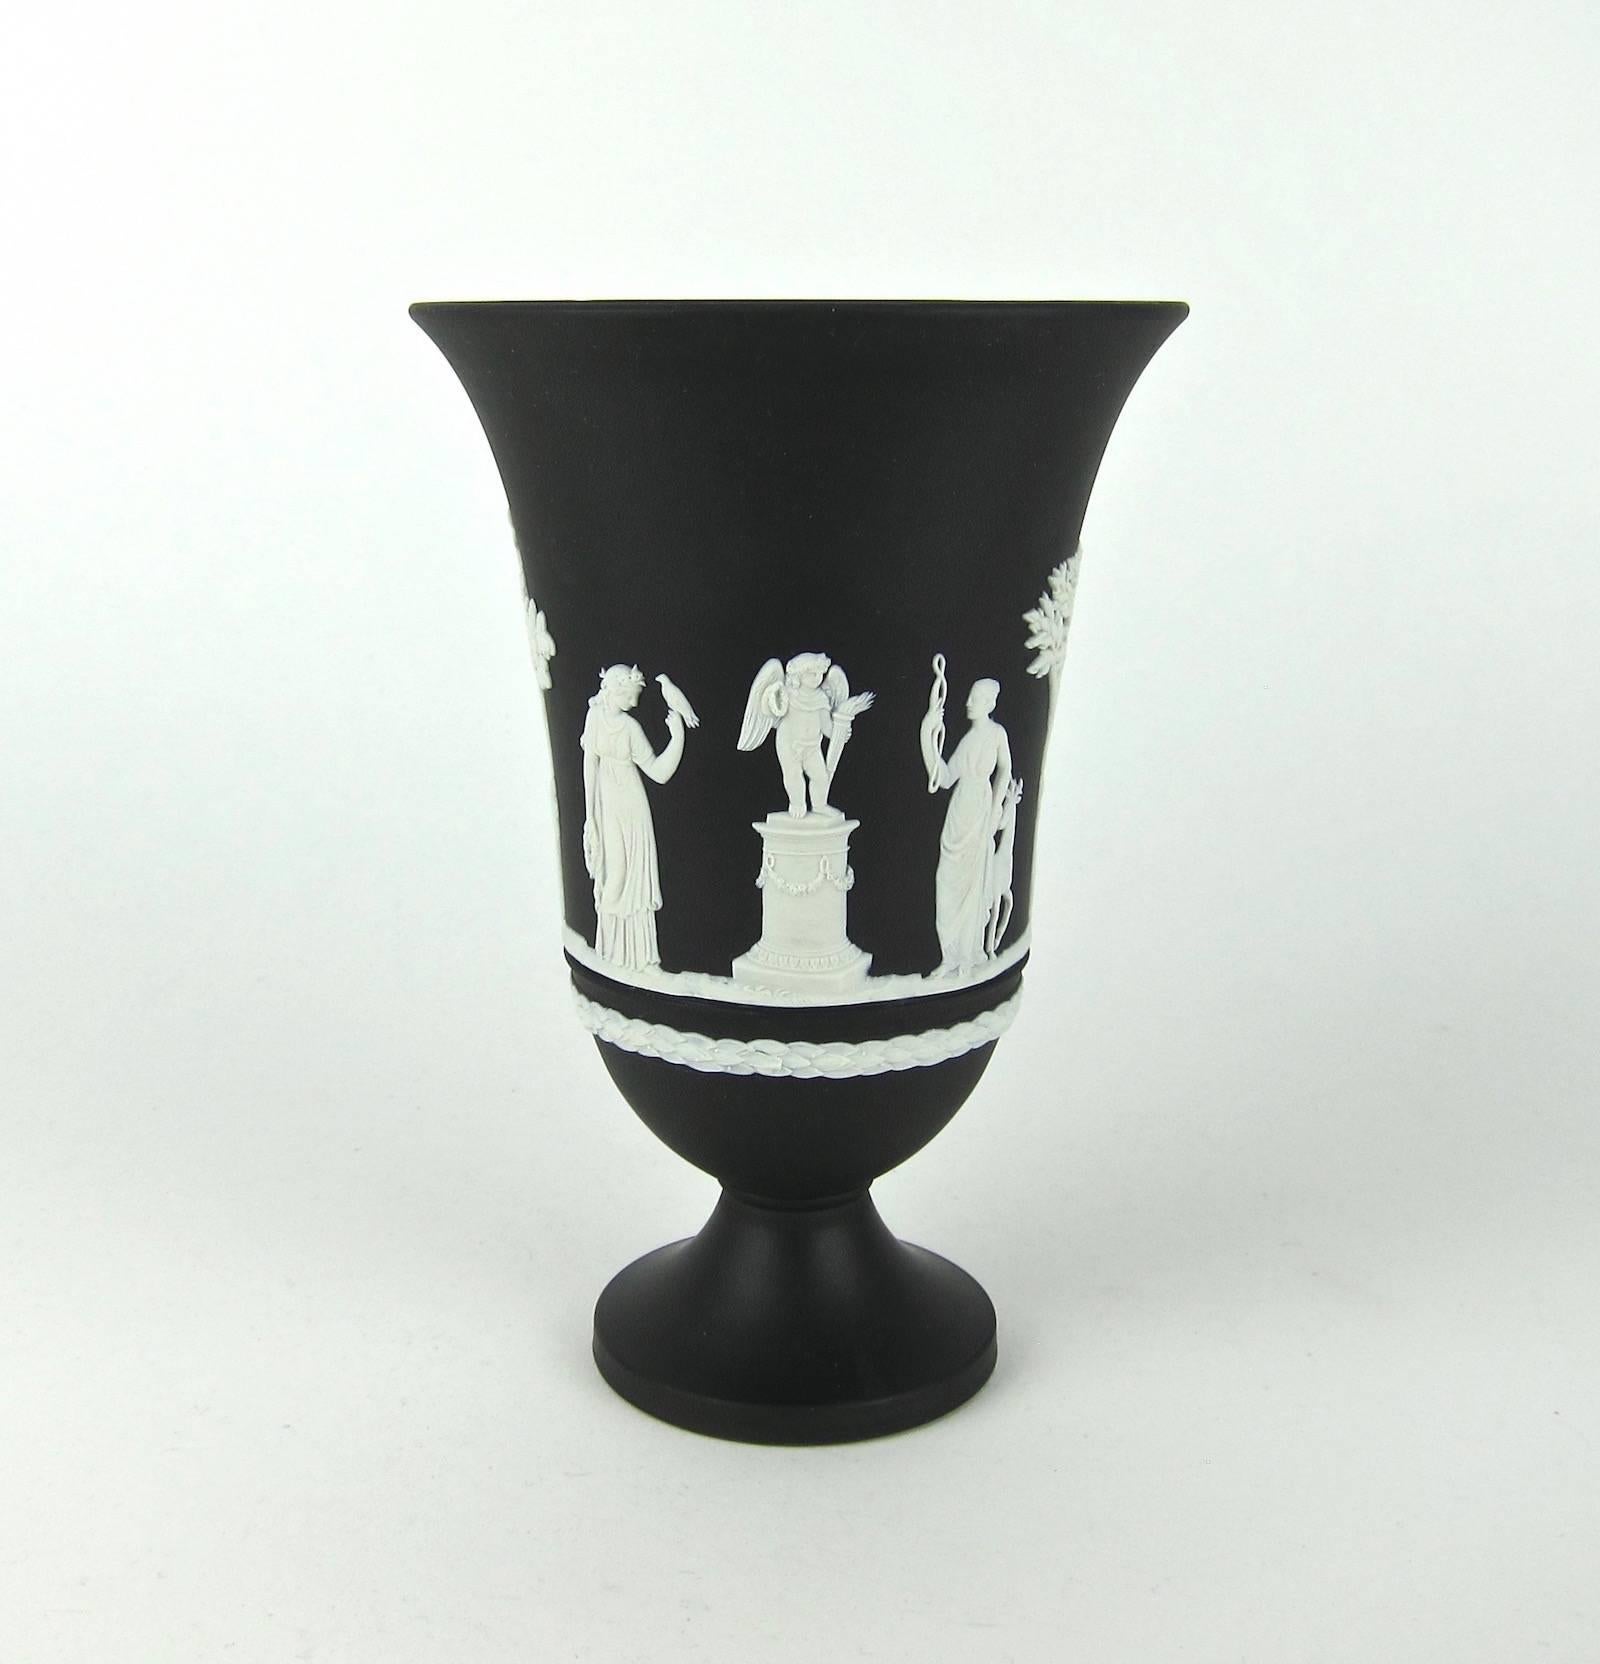 A handsome vintage Wedgwood Arcadian flaring and footed vase decorated with Neoclassical “sacrifice” figures and trees in white bas-relief on solid black jasper. The vase was made in England in 1976 and comes from an important California collection